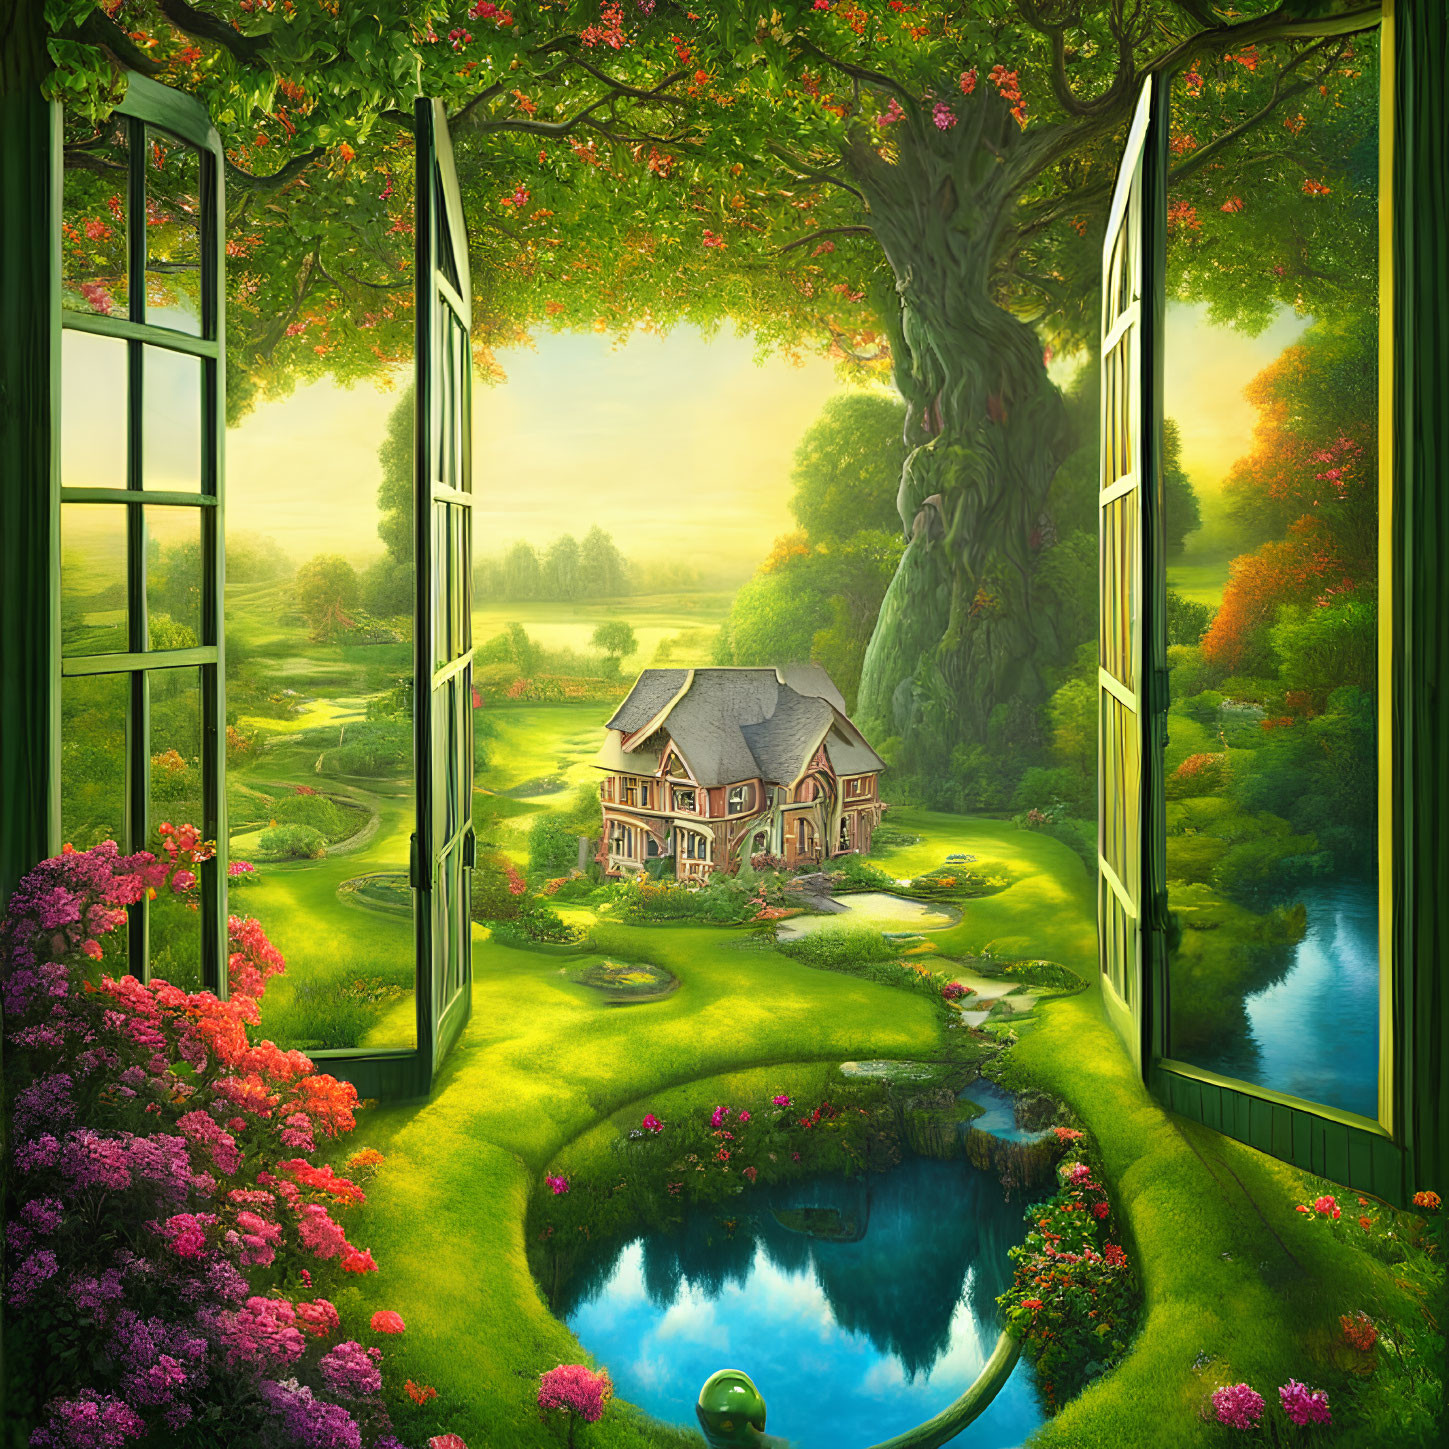 Scenic landscape with lush garden, serene pond, and cozy cottage viewed through French windows